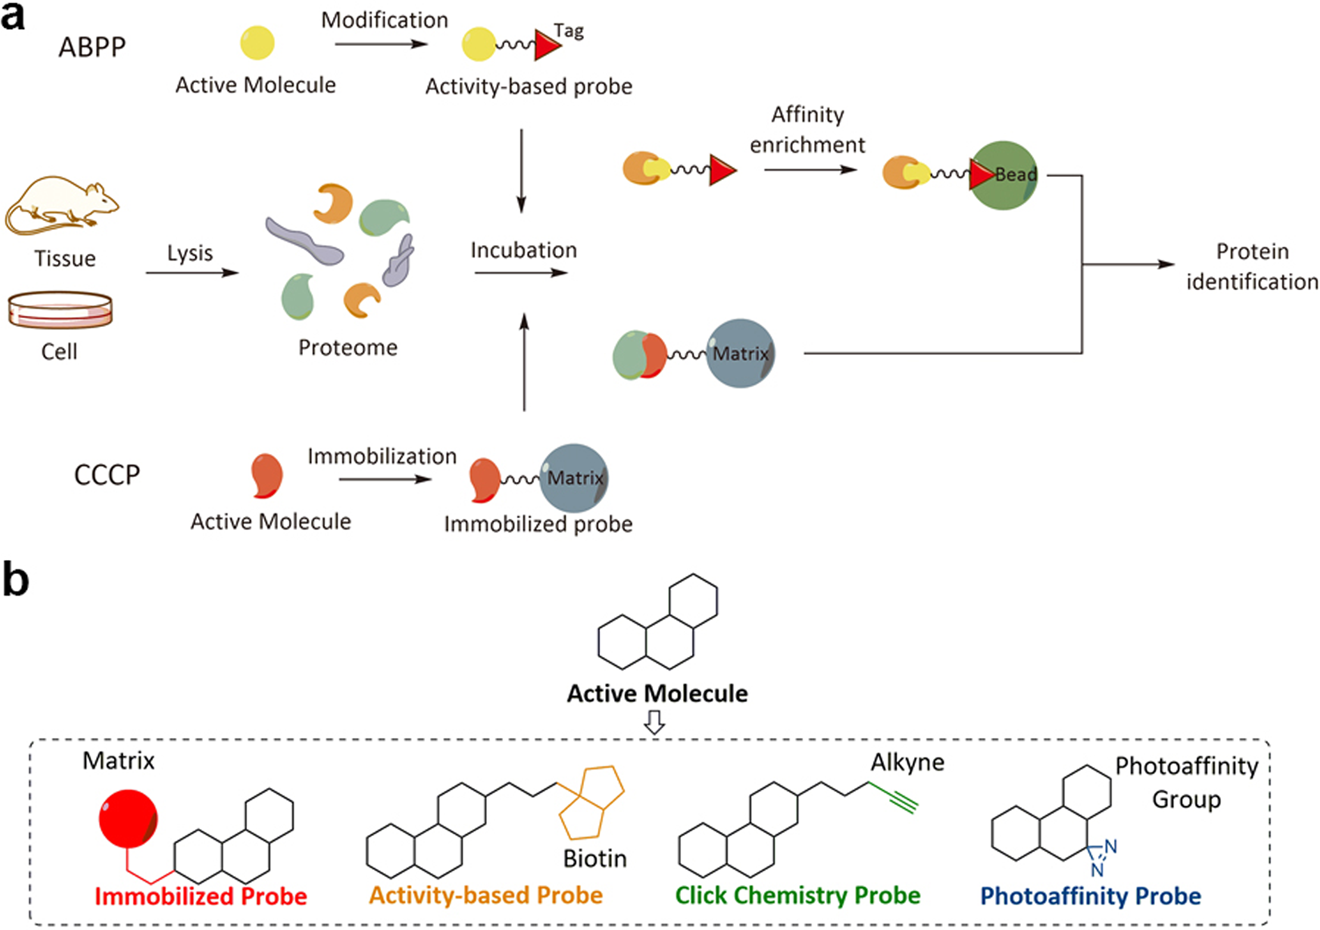 Target identification of natural medicine with chemical proteomics  approach: probe synthesis, target fishing and protein identification |  Signal Transduction and Targeted Therapy